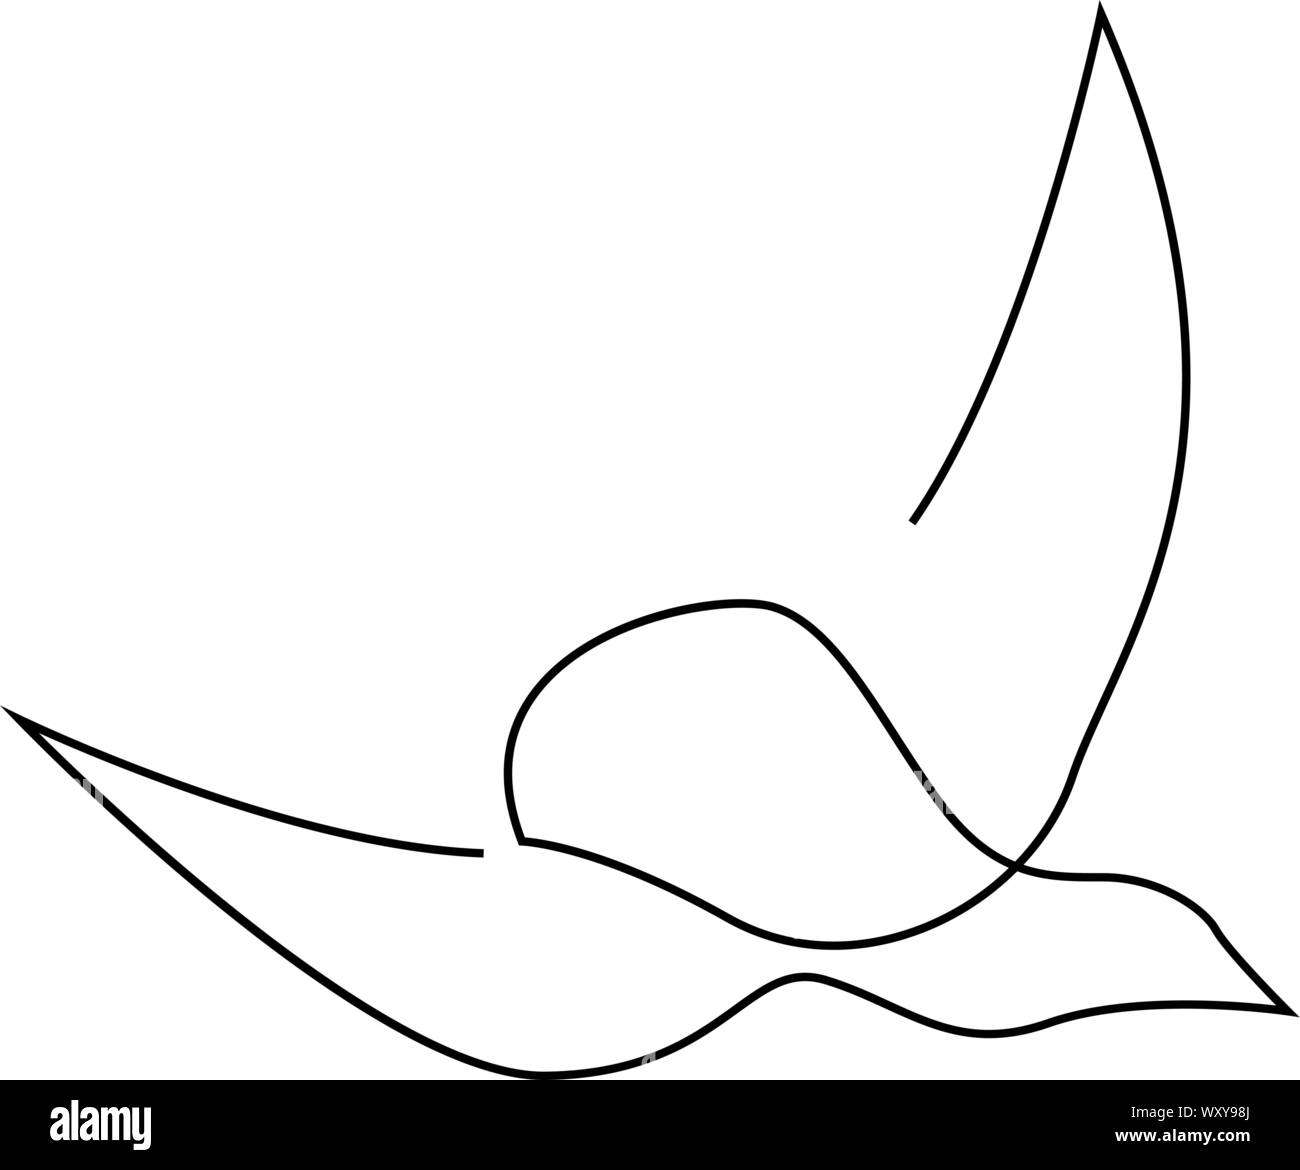 One line dove or pigeon flies design silhouette.Hand drawn minimalism style. Vector illustration Stock Vector